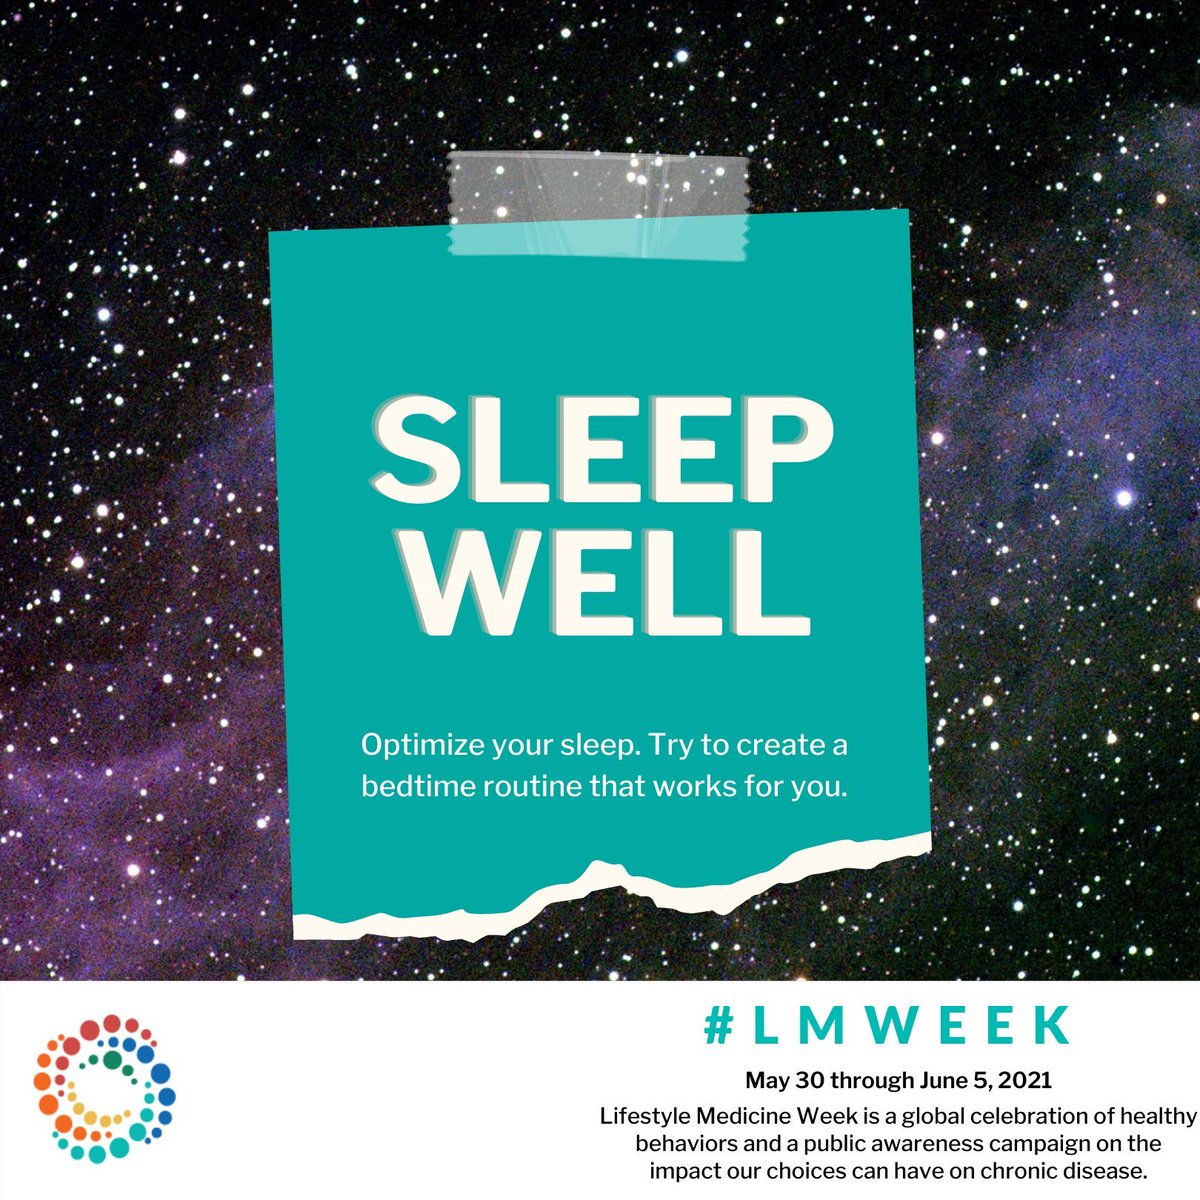 #sleep dont let it be a #dream:) @ACLifeMed #LMWeek